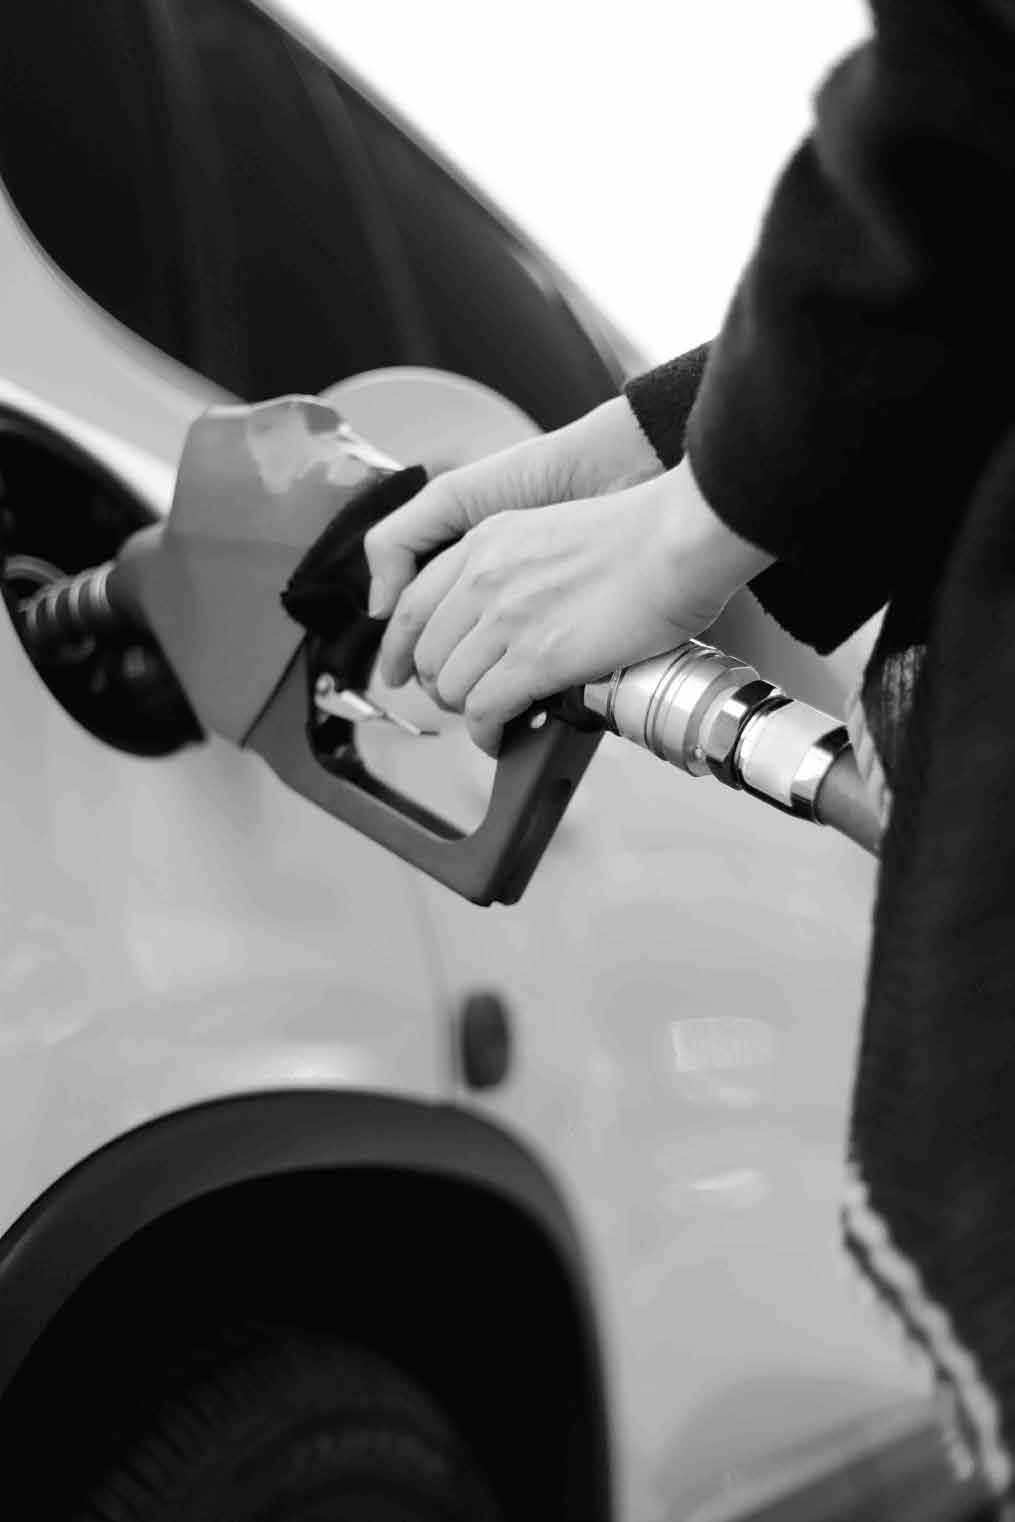 FUEL SURCHARGE WAIVER 1% fuel surcharge waived off on fuel transactions of maximum `4,000 at HPCL pumps when the Credit Card is swiped on ICICI Merchant Services swipe